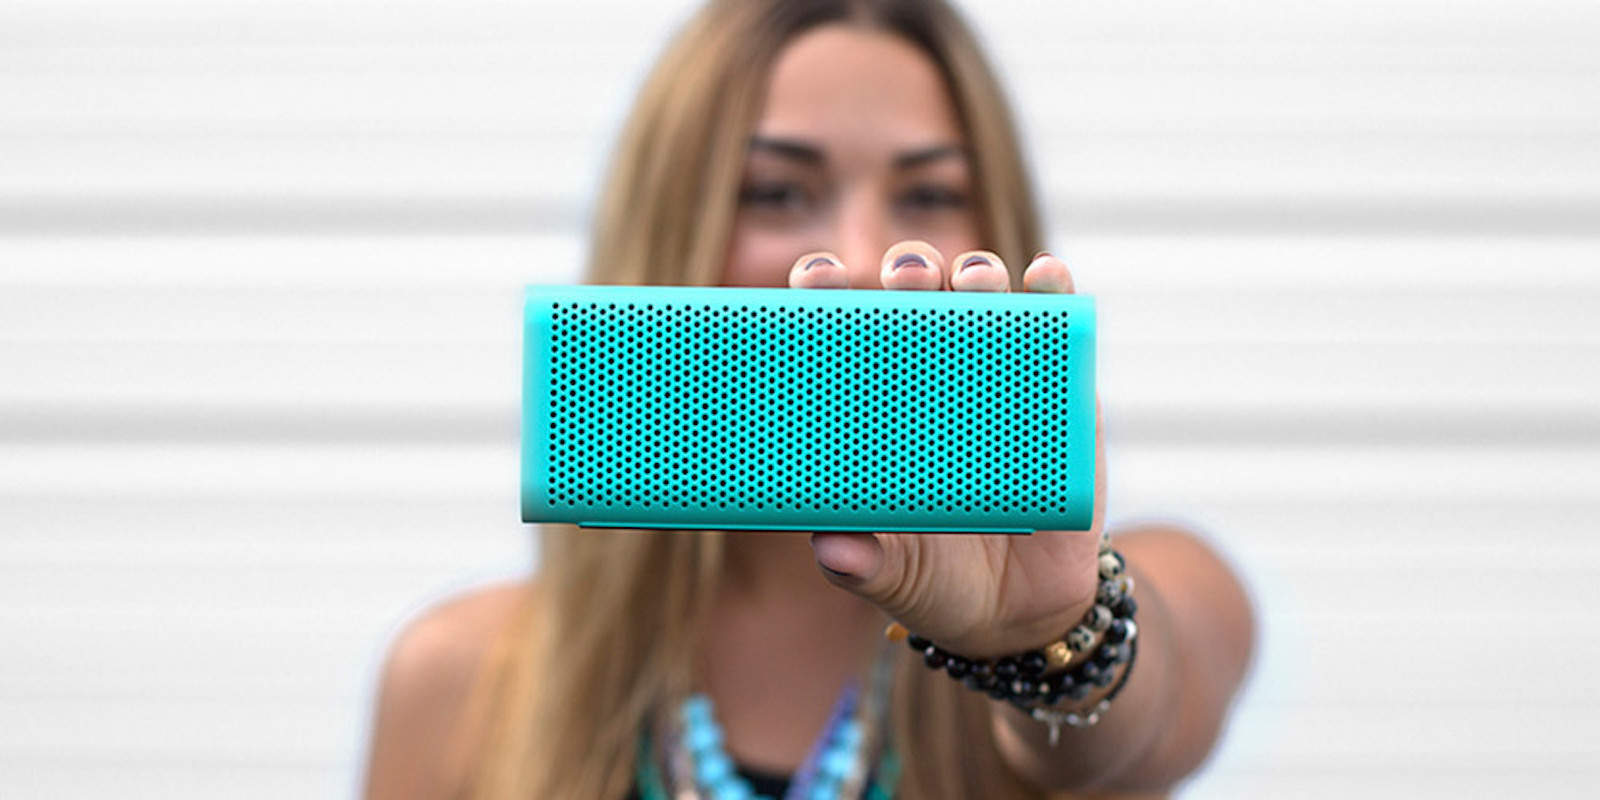 These water-resistant Bluetooth speakers offer 12-hour playtime on a single charge